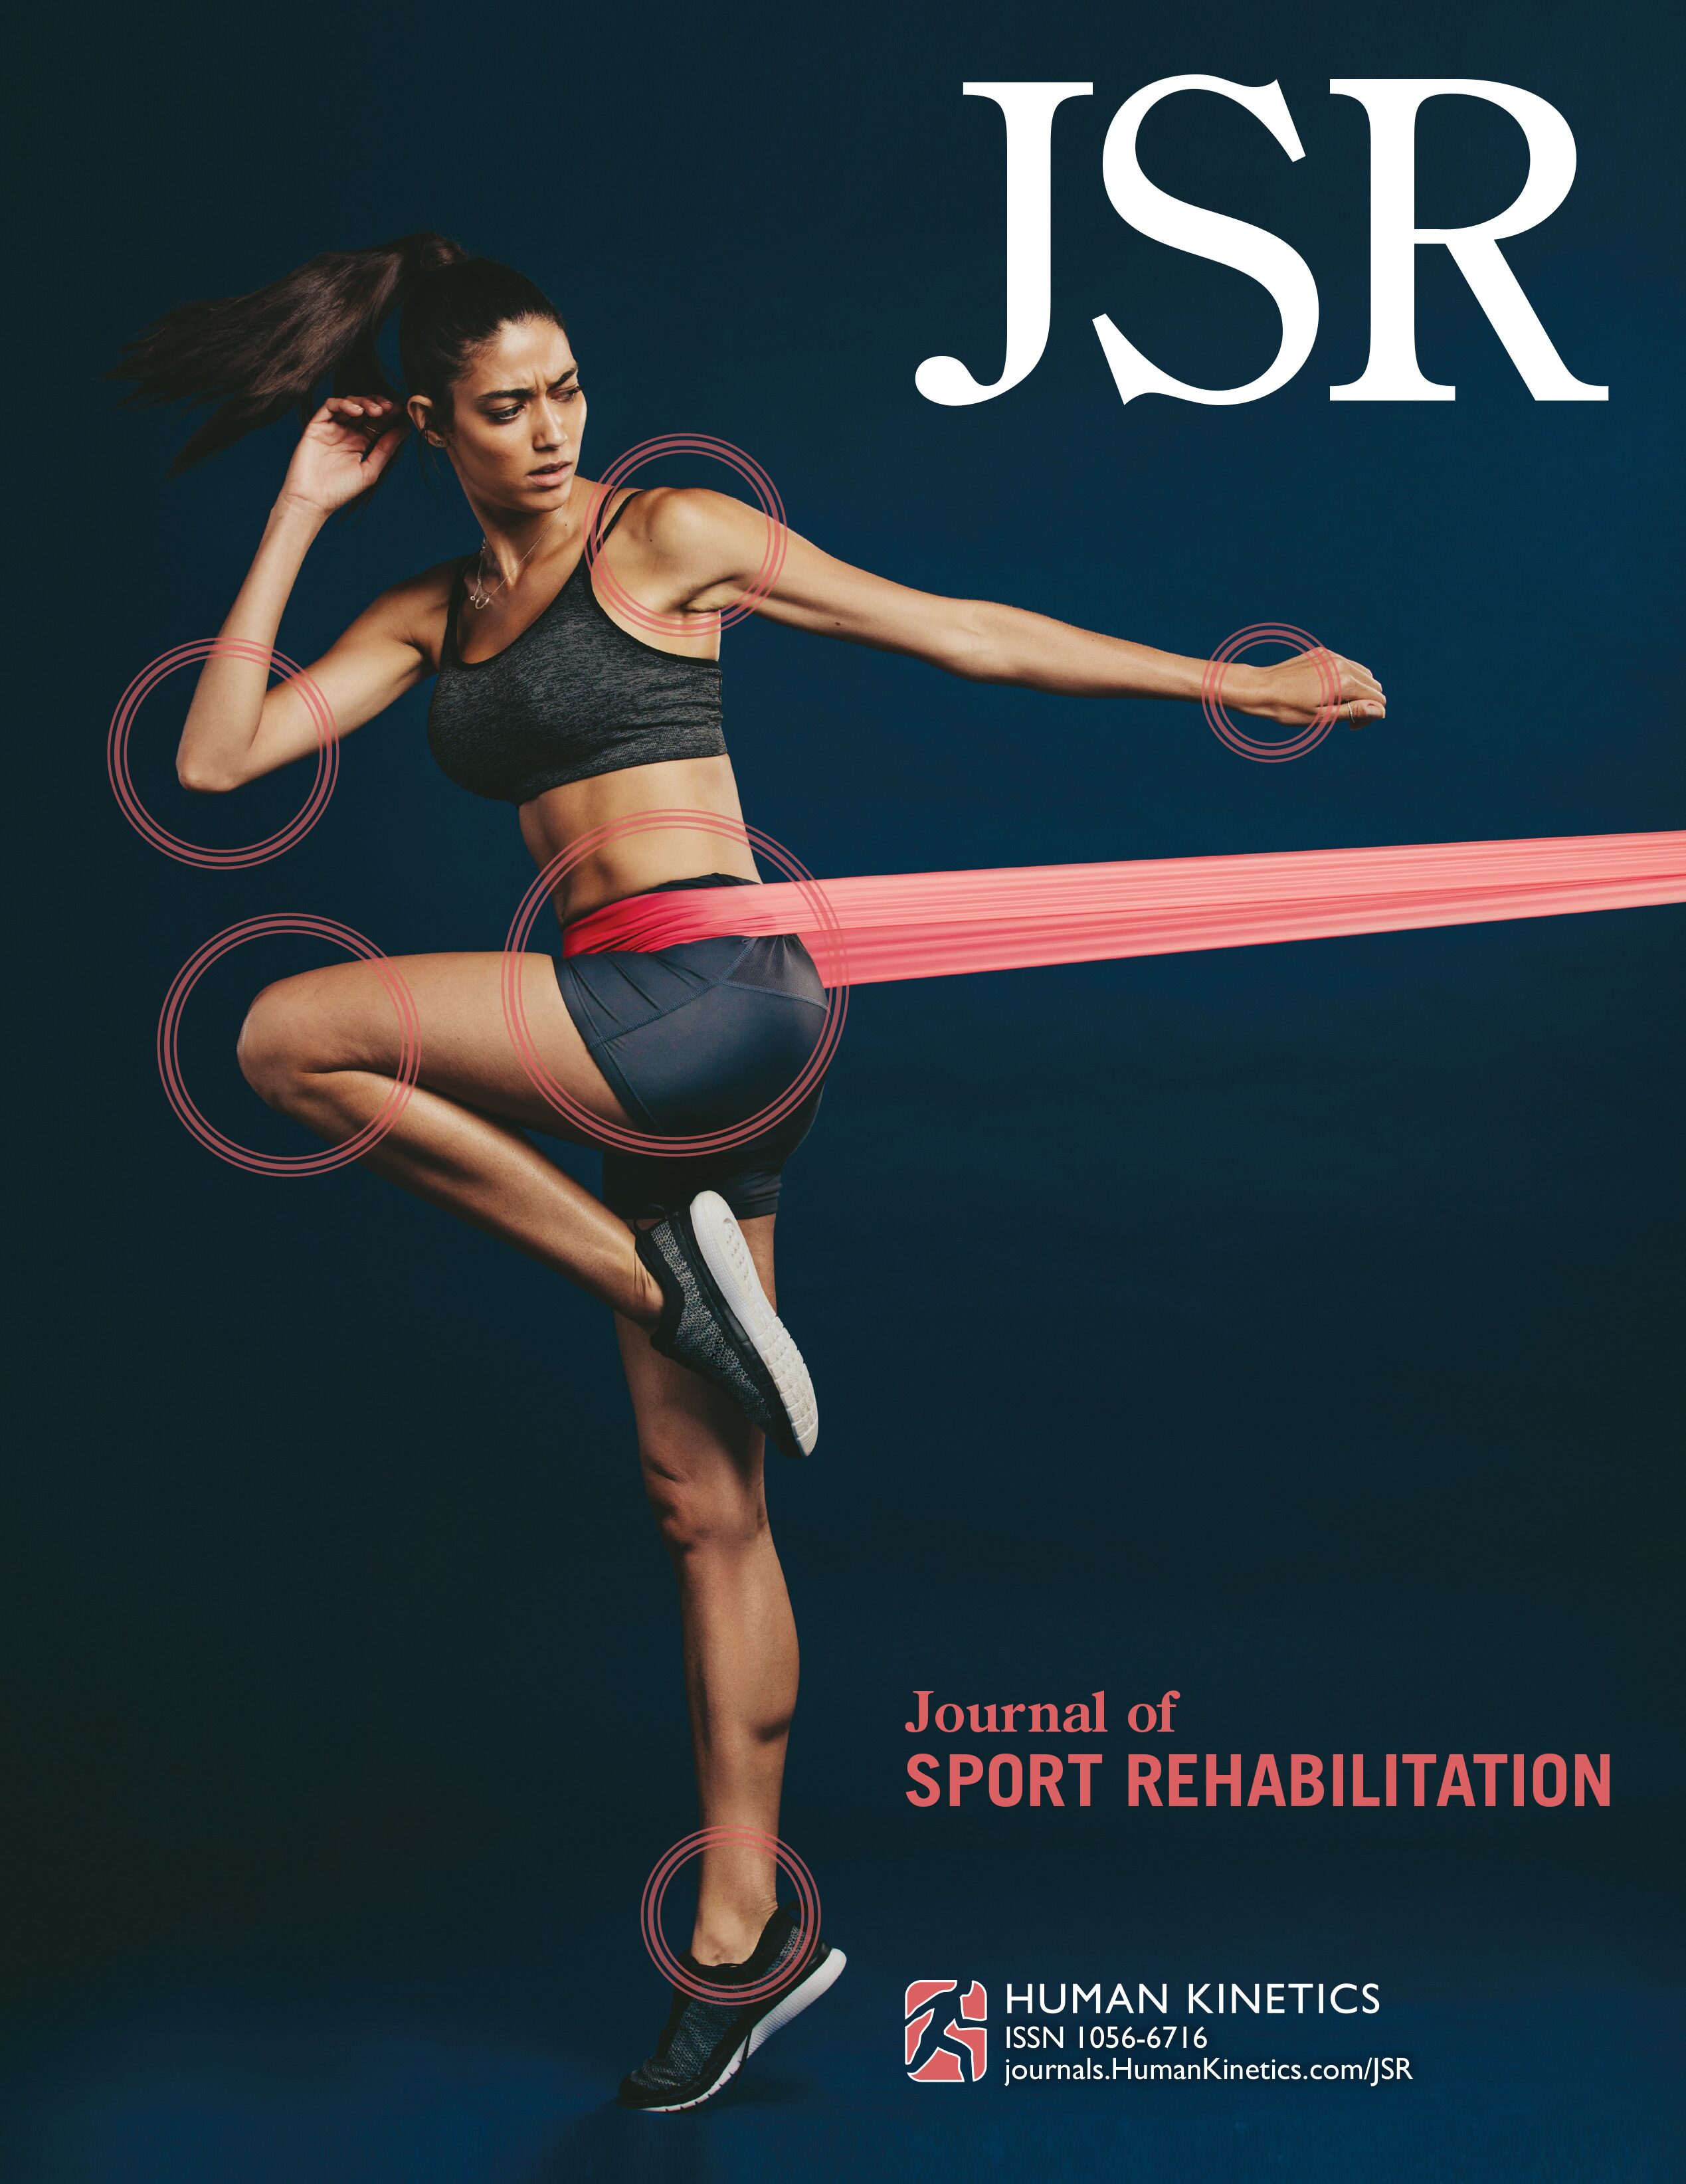 Spanish Cross-Cultural Adaptation and Validation of the Kerlan-Jobe Orthopaedic Clinic Shoulder and Elbow Score